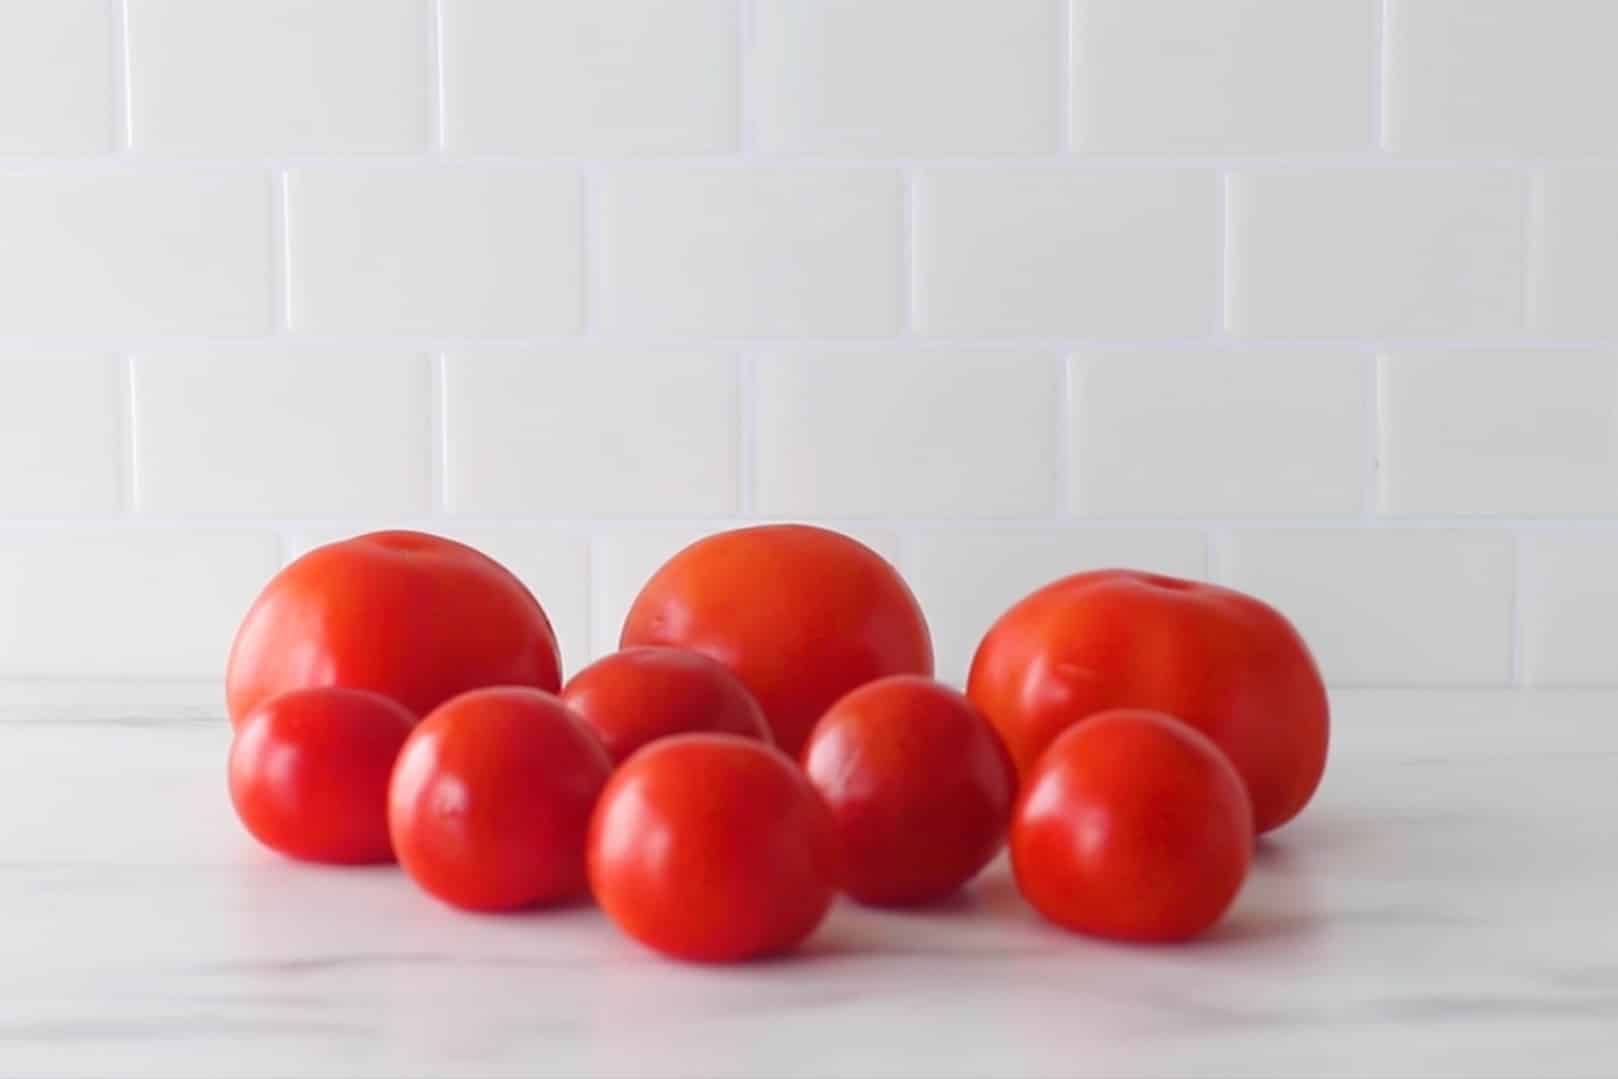 frugal food hacks: how to store tomatoes to extend their shelf life